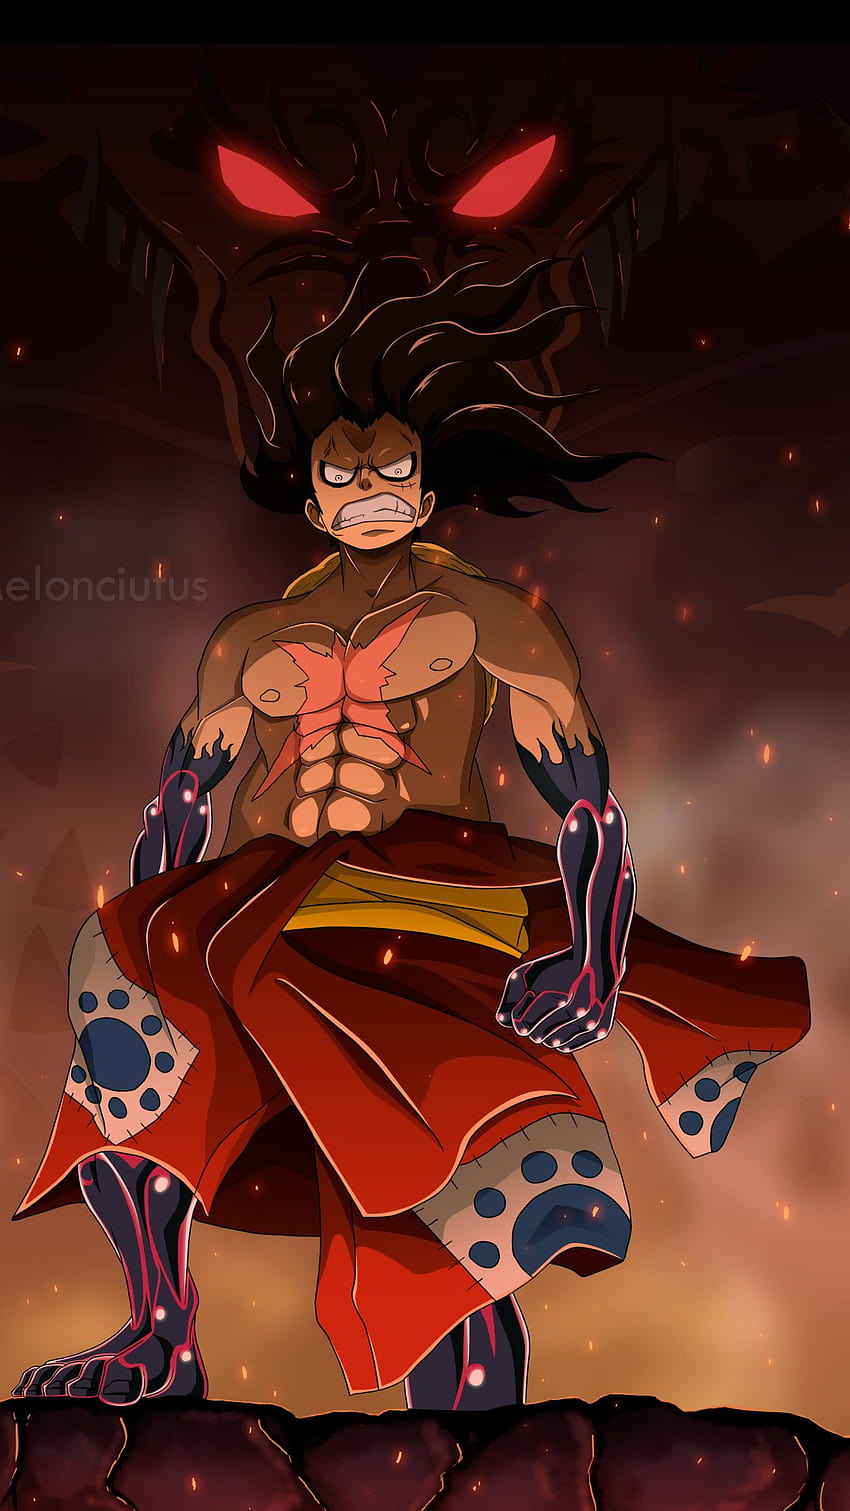 Dark • One Piece, Monkey D. Luffy, Kaido, Gear Fourth Snakeman, dark • For You The Best For & Mobile, one piece amoled HD phone wallpaper